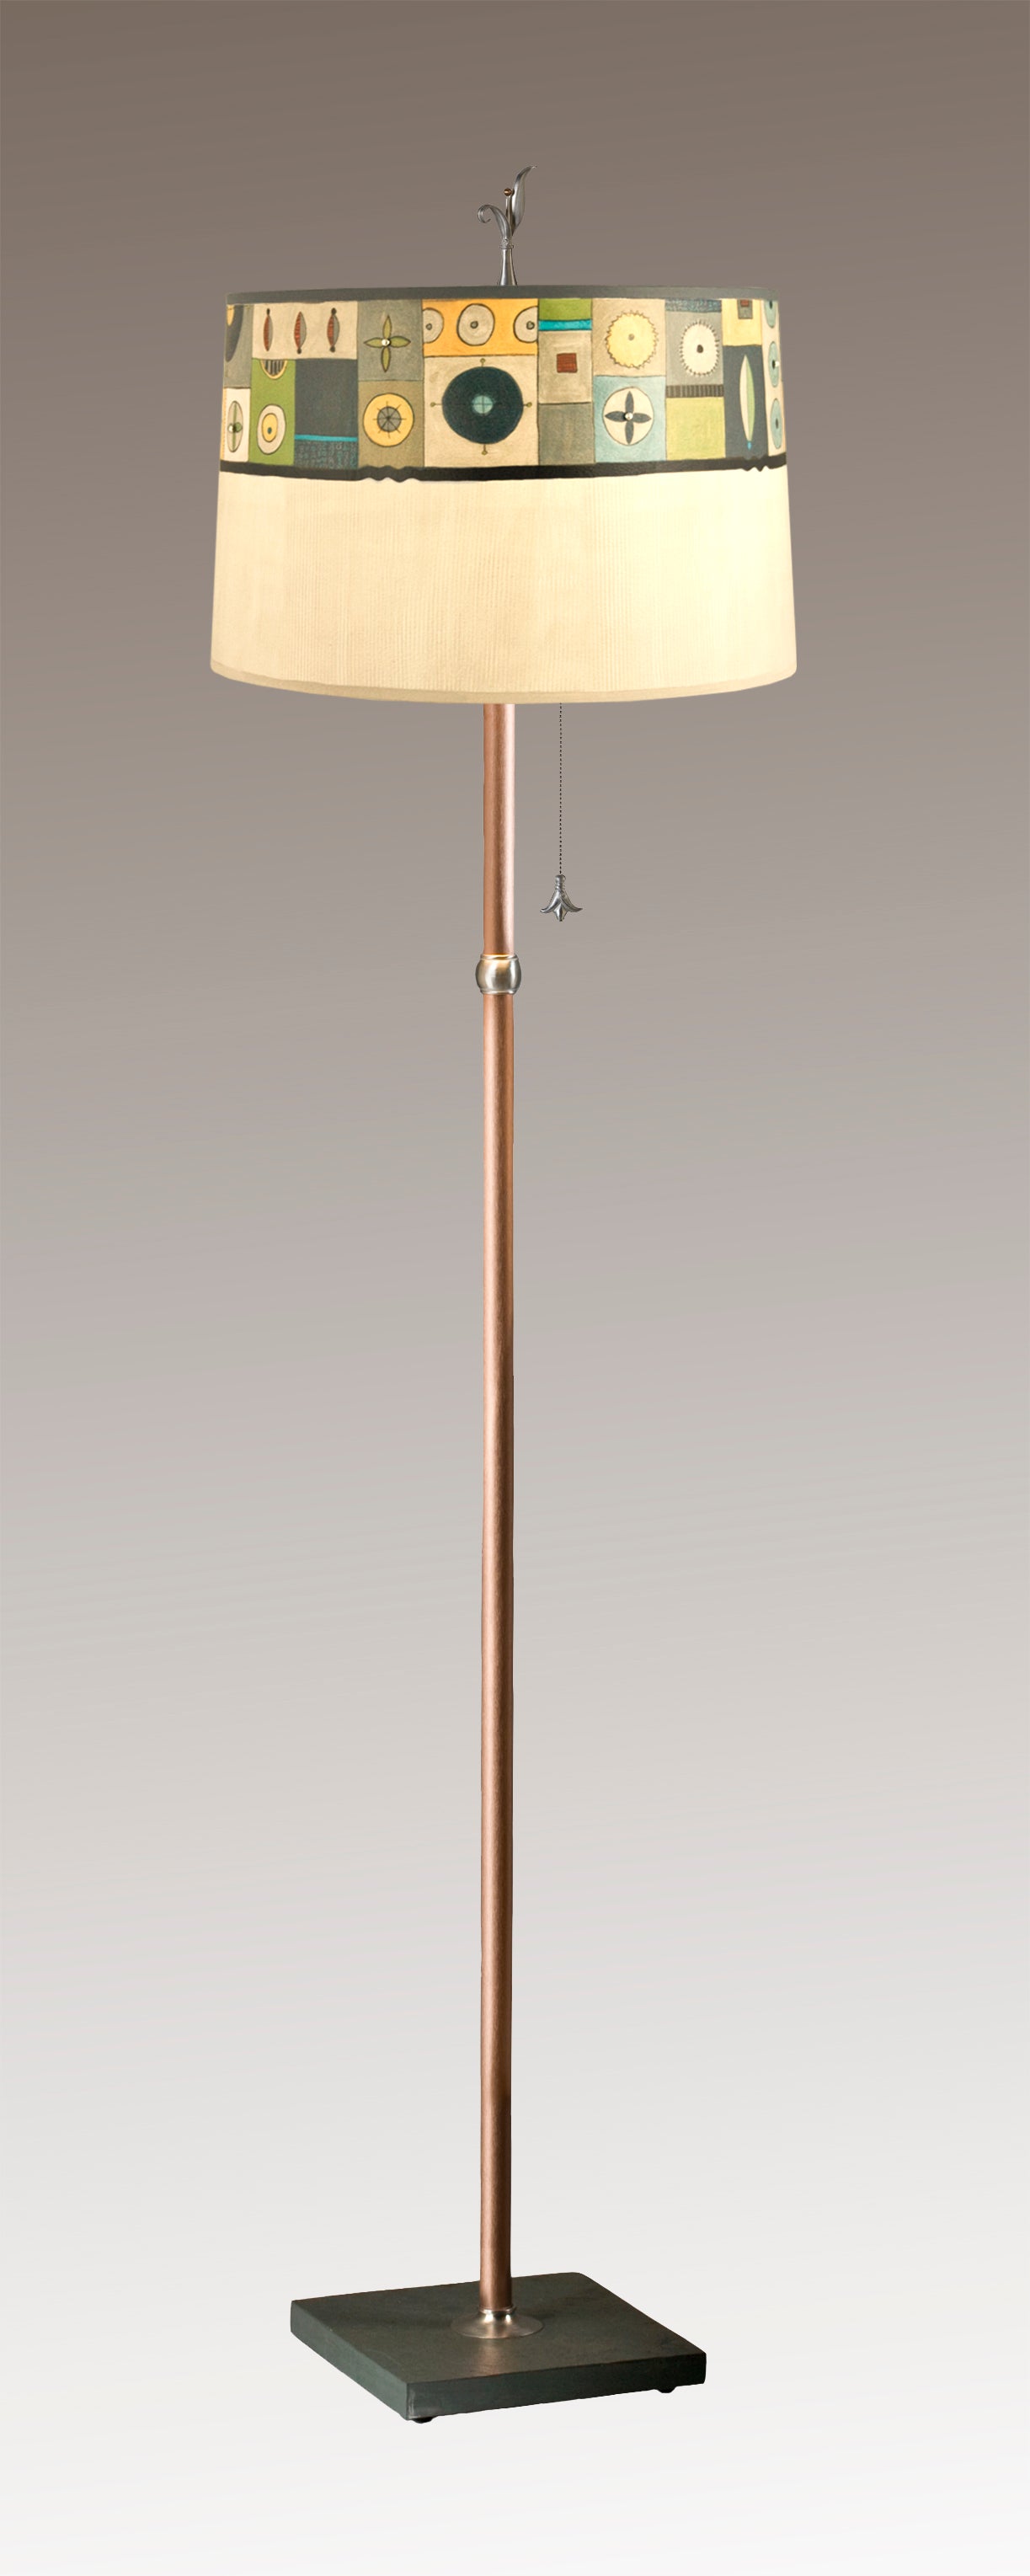 Janna Ugone & Co Floor Lamps Copper Floor Lamp with Large Drum Shade in Lucky Mosaic Oyster